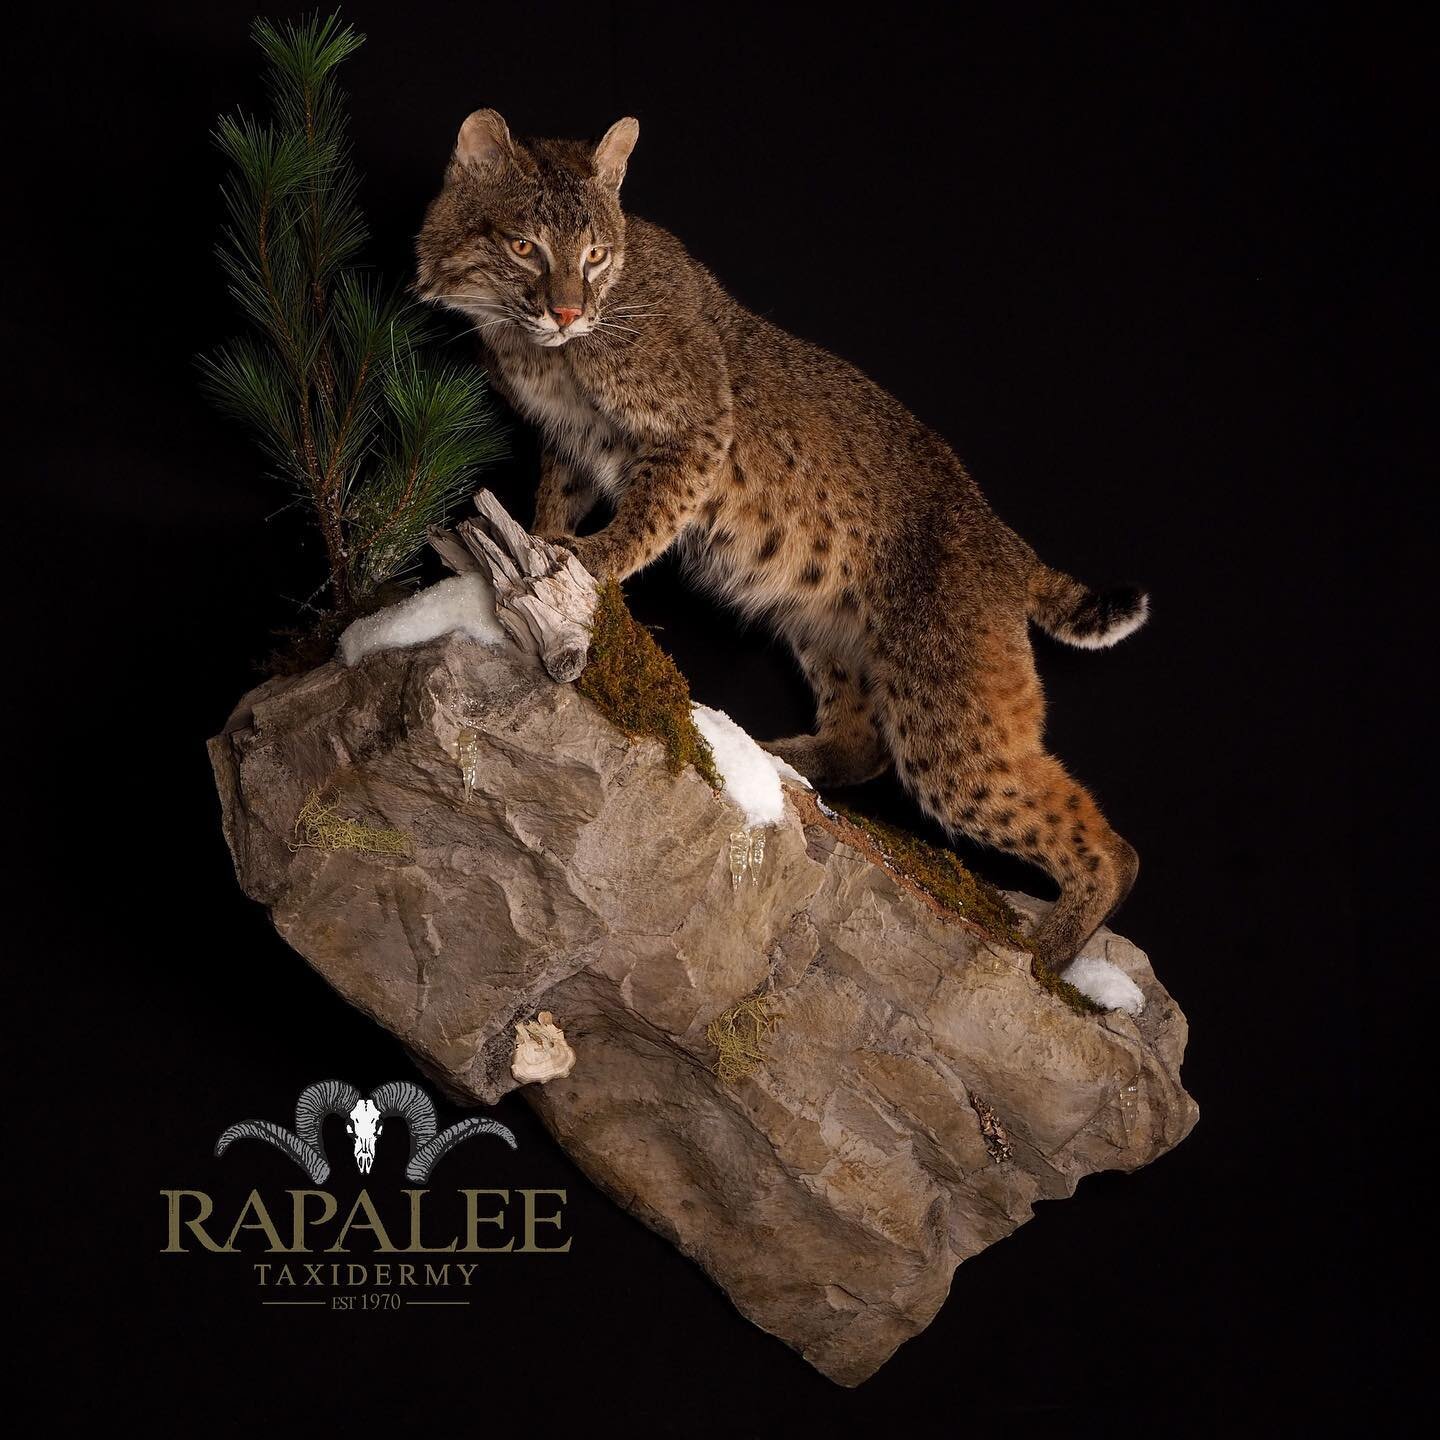 This bobcat is positioned in a front elevated pose on one of our custom rock habitats. *bobcat fun fact* they stalk their prey with unparalleled patience, and often travel up to 7 miles in an evening while hunting and patrolling their territory. Let 